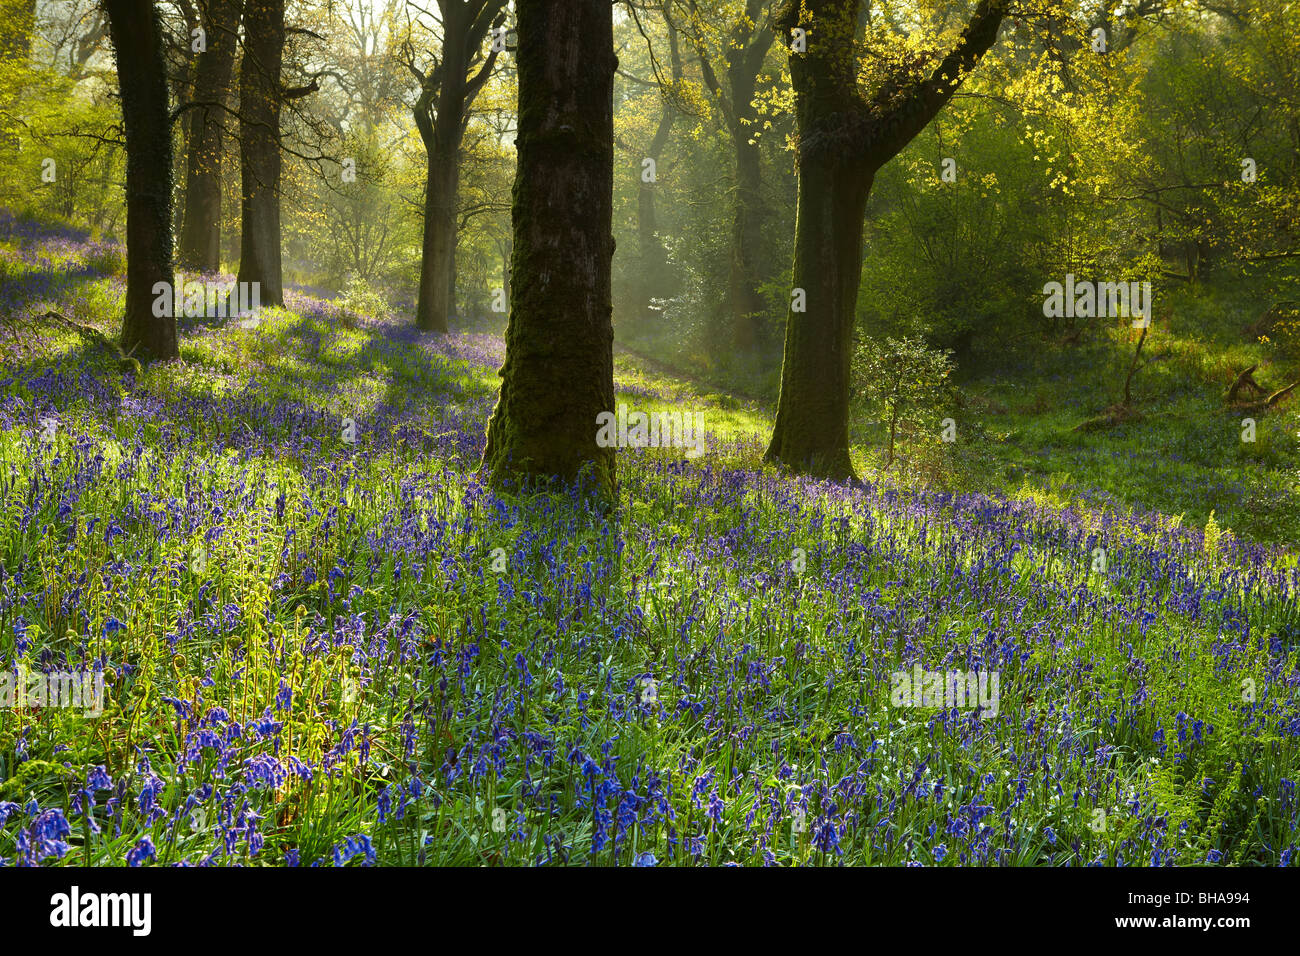 Bluebells in the woods at Batcombe, Dorset, England, UK Stock Photo